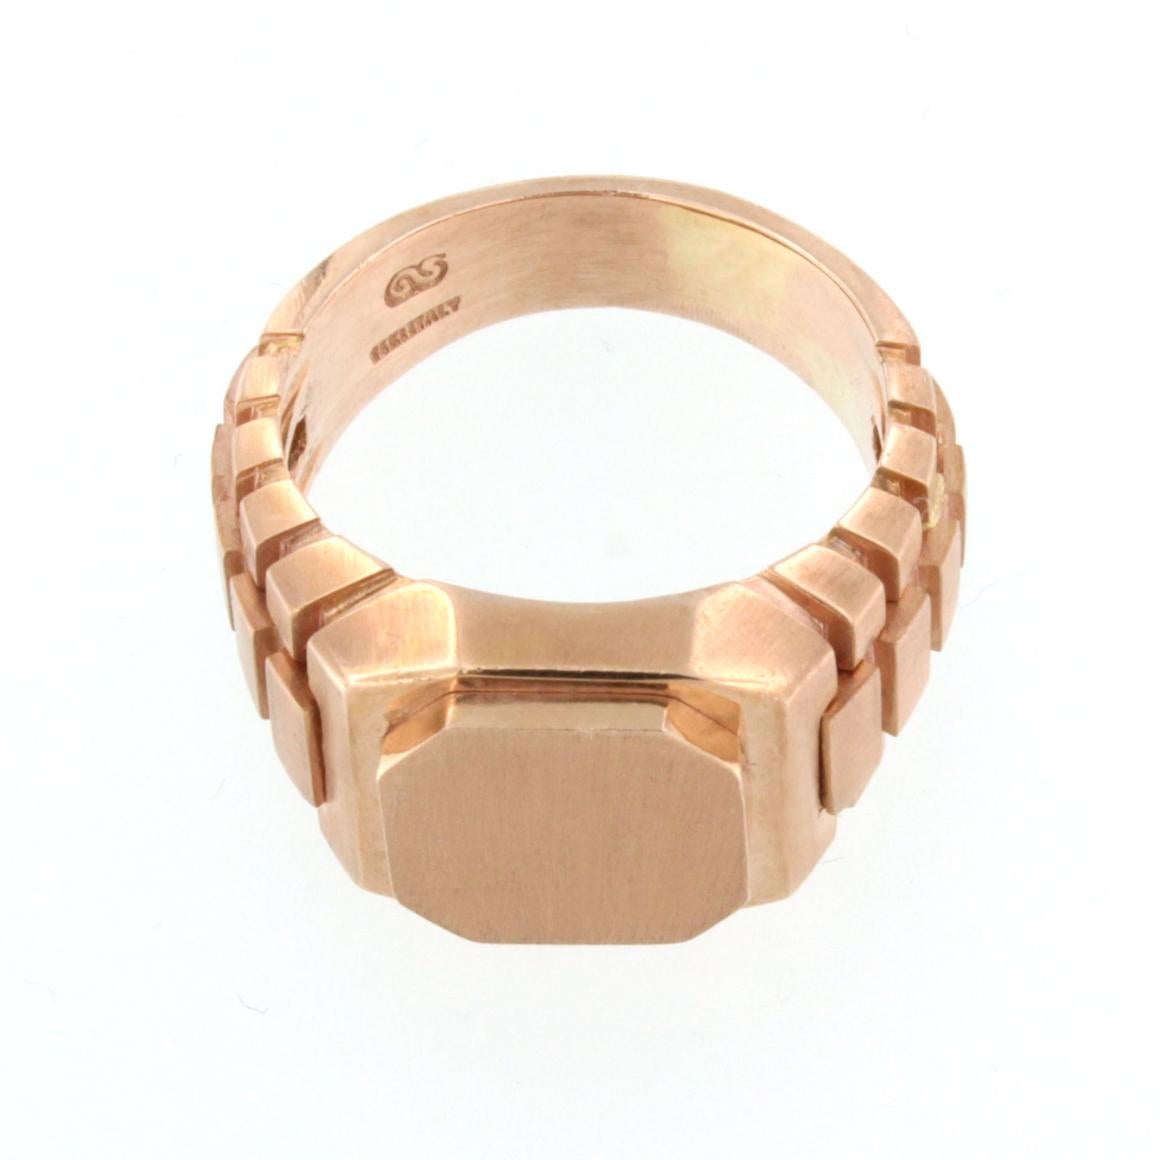 Rolex type ring . Very special ring , suitable for a woman or a man.
Ring in 14k rose gold

Size of ring:  20 EU  - USA 9,5

All Stanoppi Jewelry is new and has never been previously owned or worn. Each item will arrive at your door beautifully gift